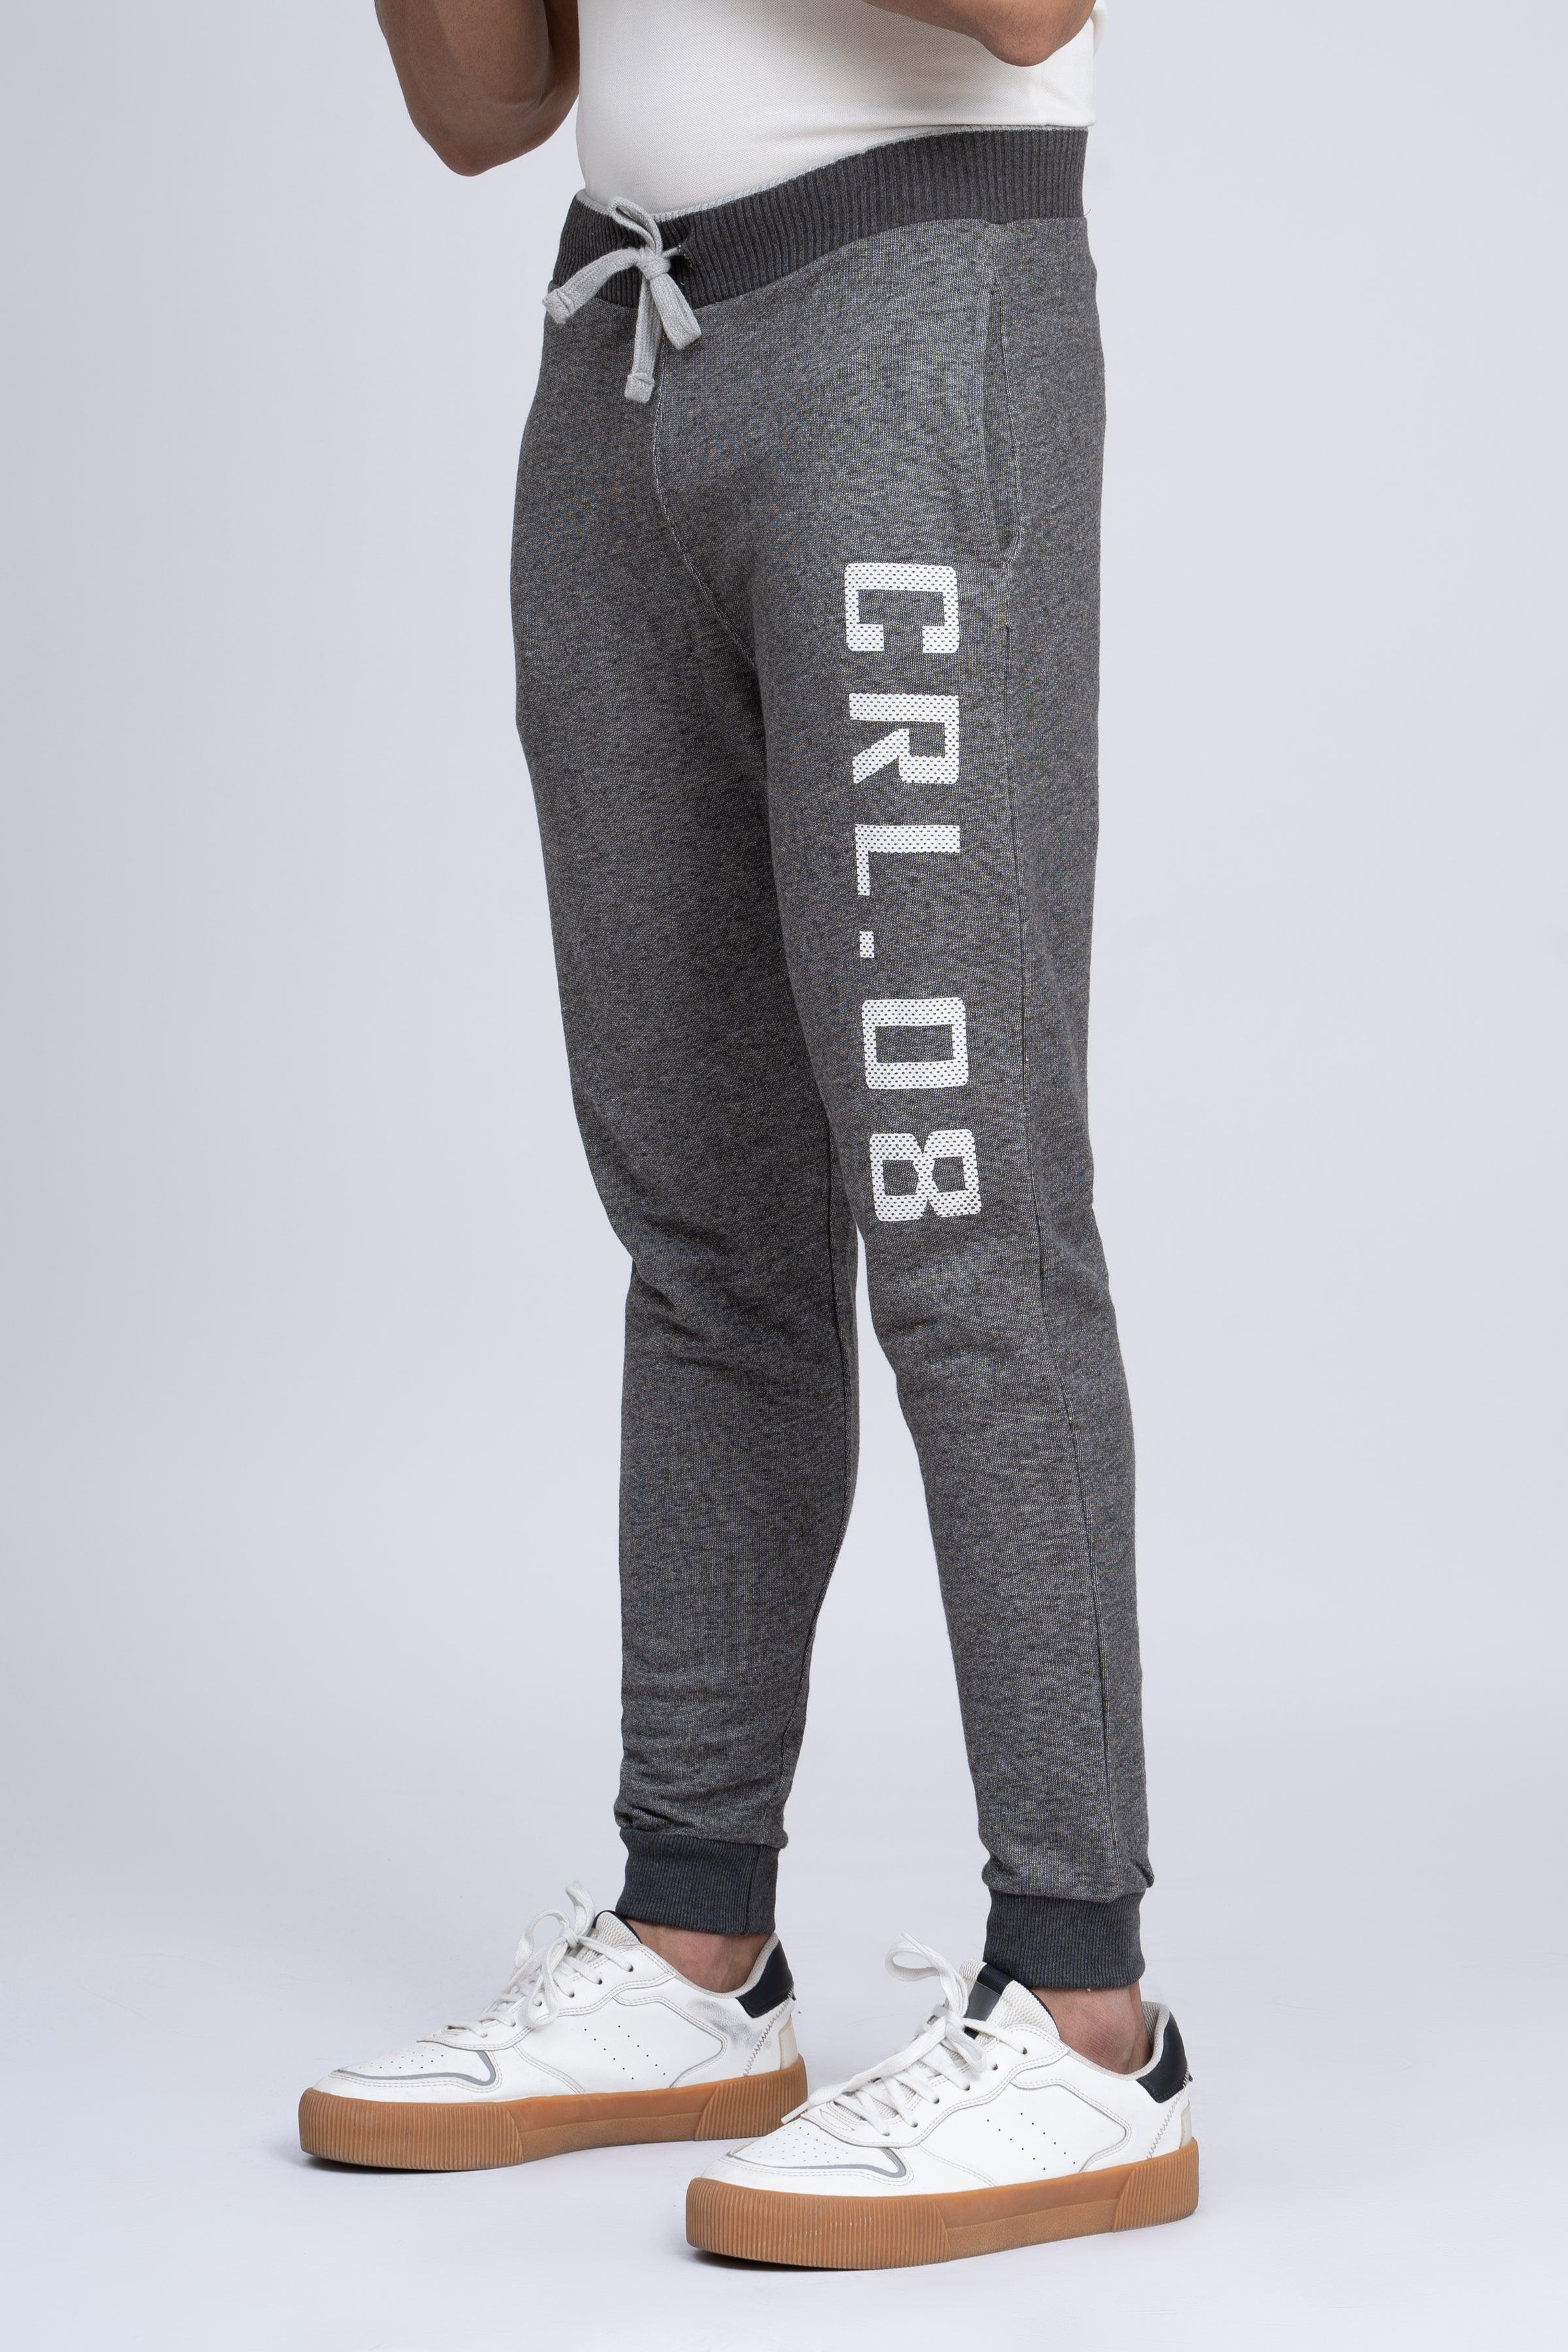 CASUAL TROUSER DARK GREY at Charcoal Clothing